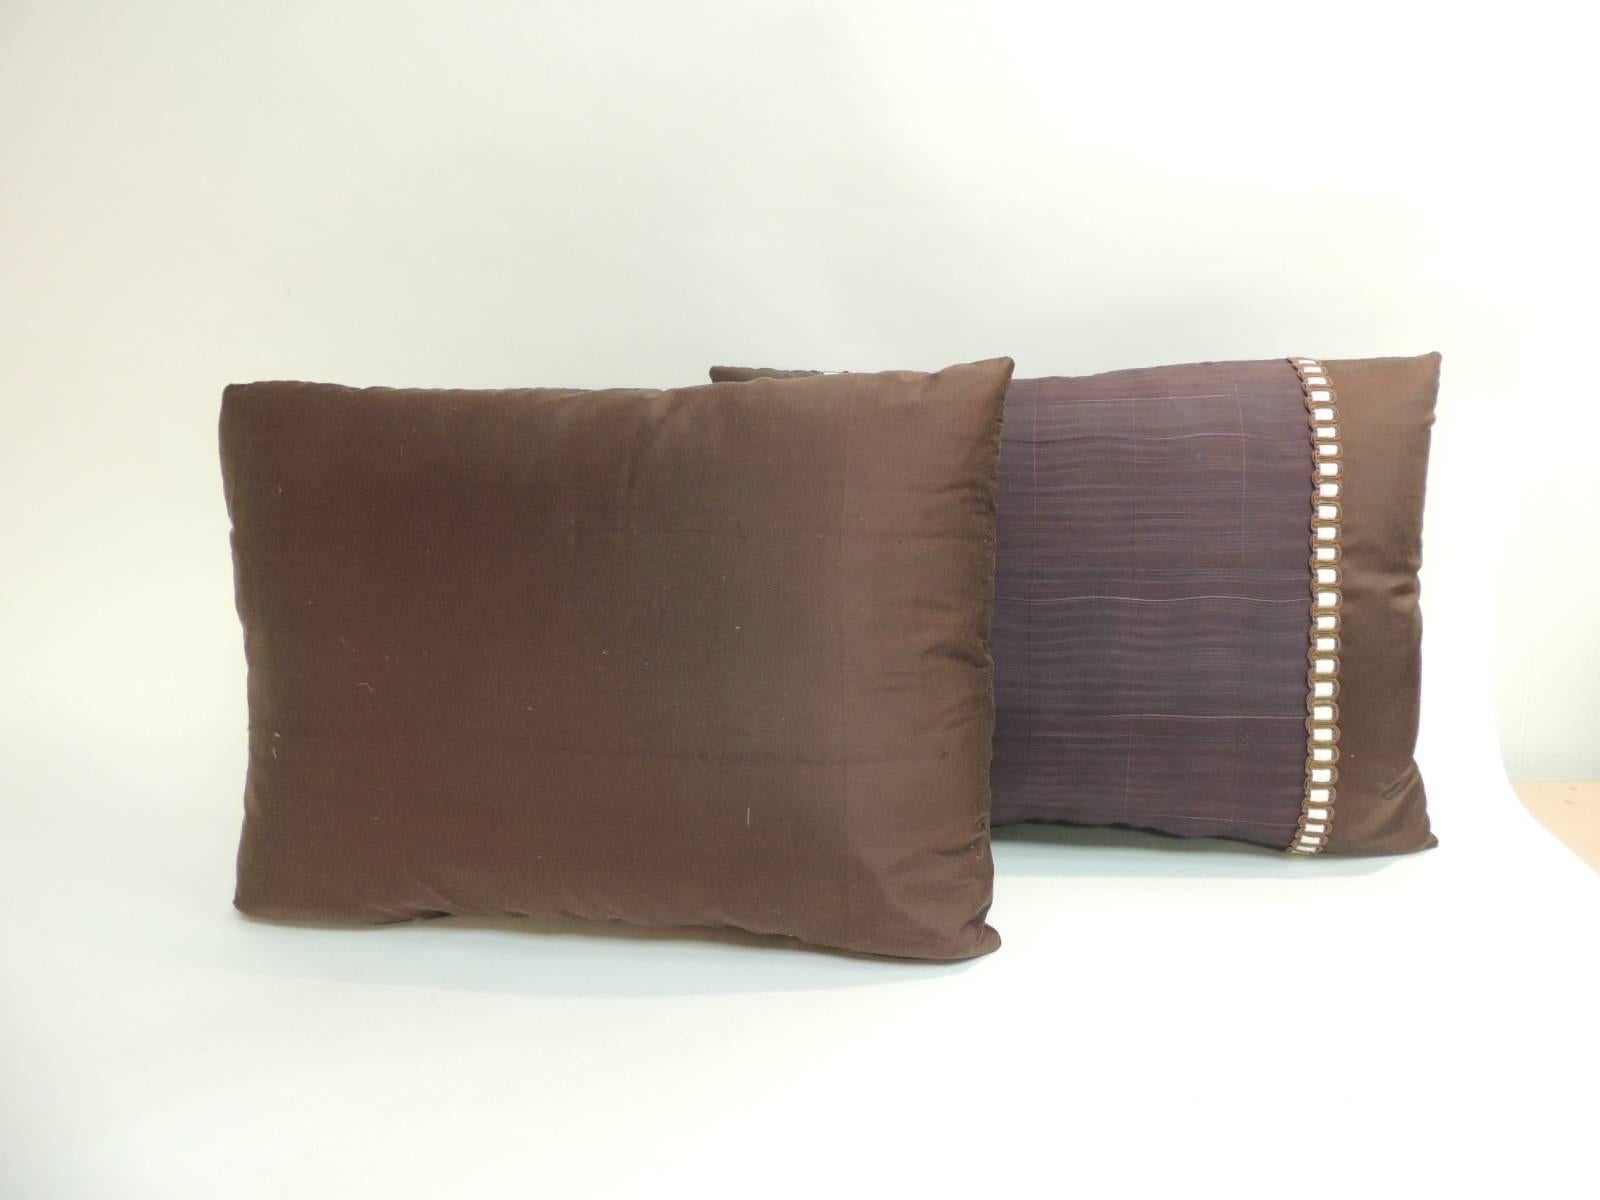 Hand-Crafted Pair of Vintage Brown and Purple Obi Woven Textile Bolster Decorative Pillows